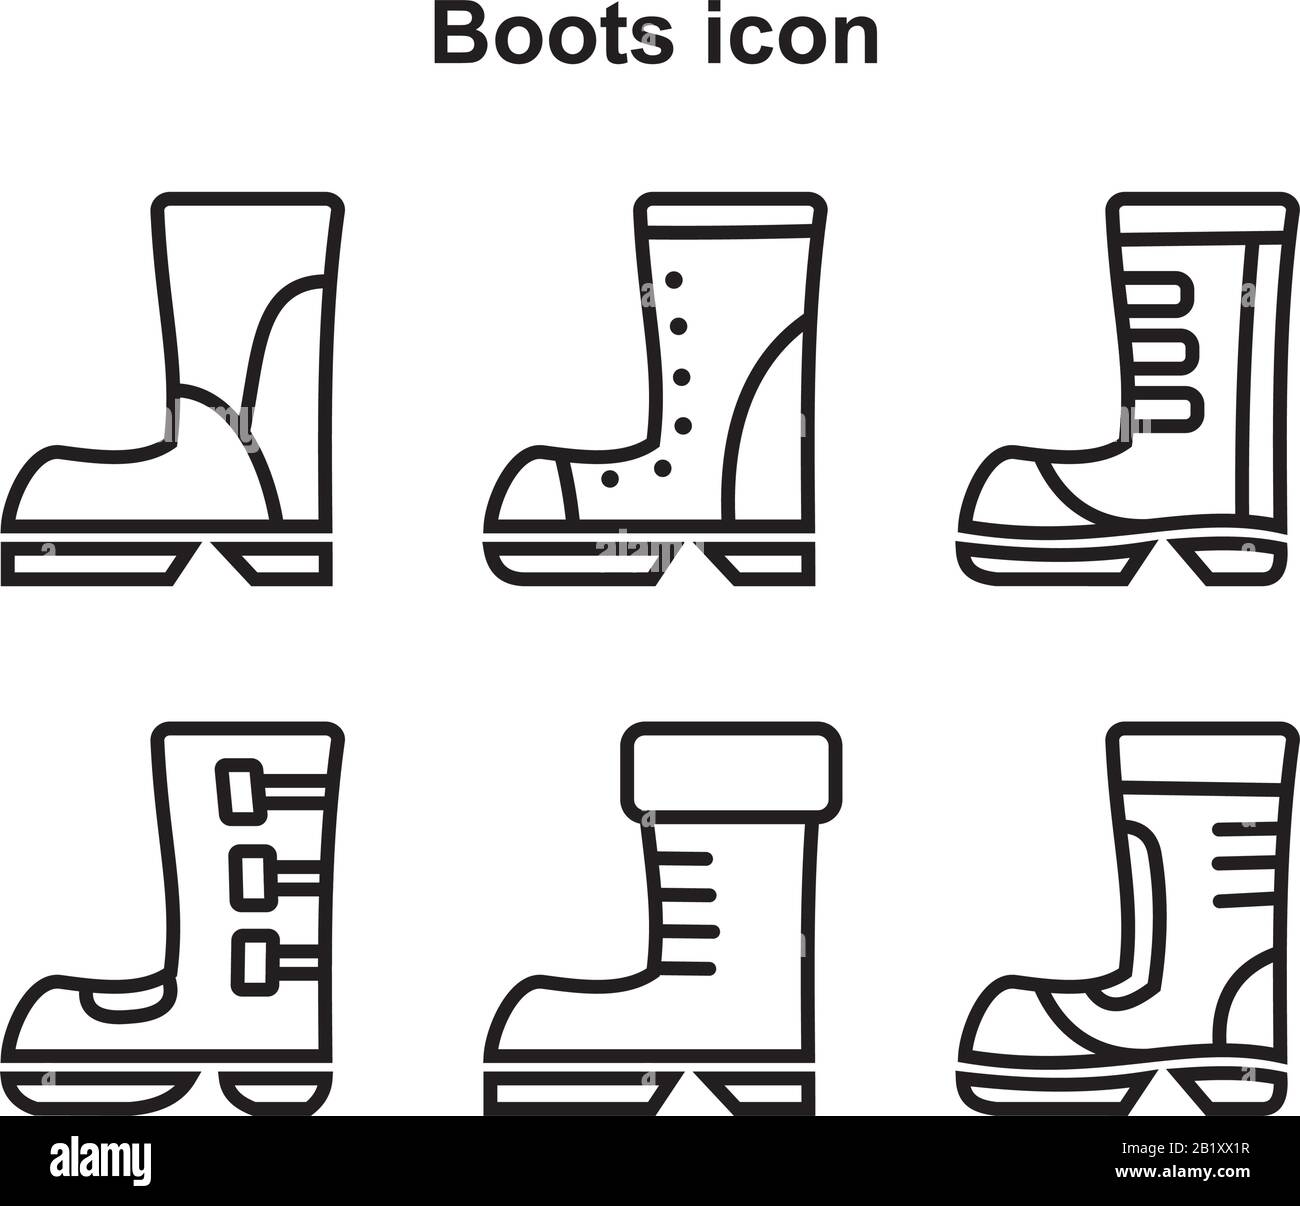 Boots icon template black color editable. Boots icon symbol Flat vector ...